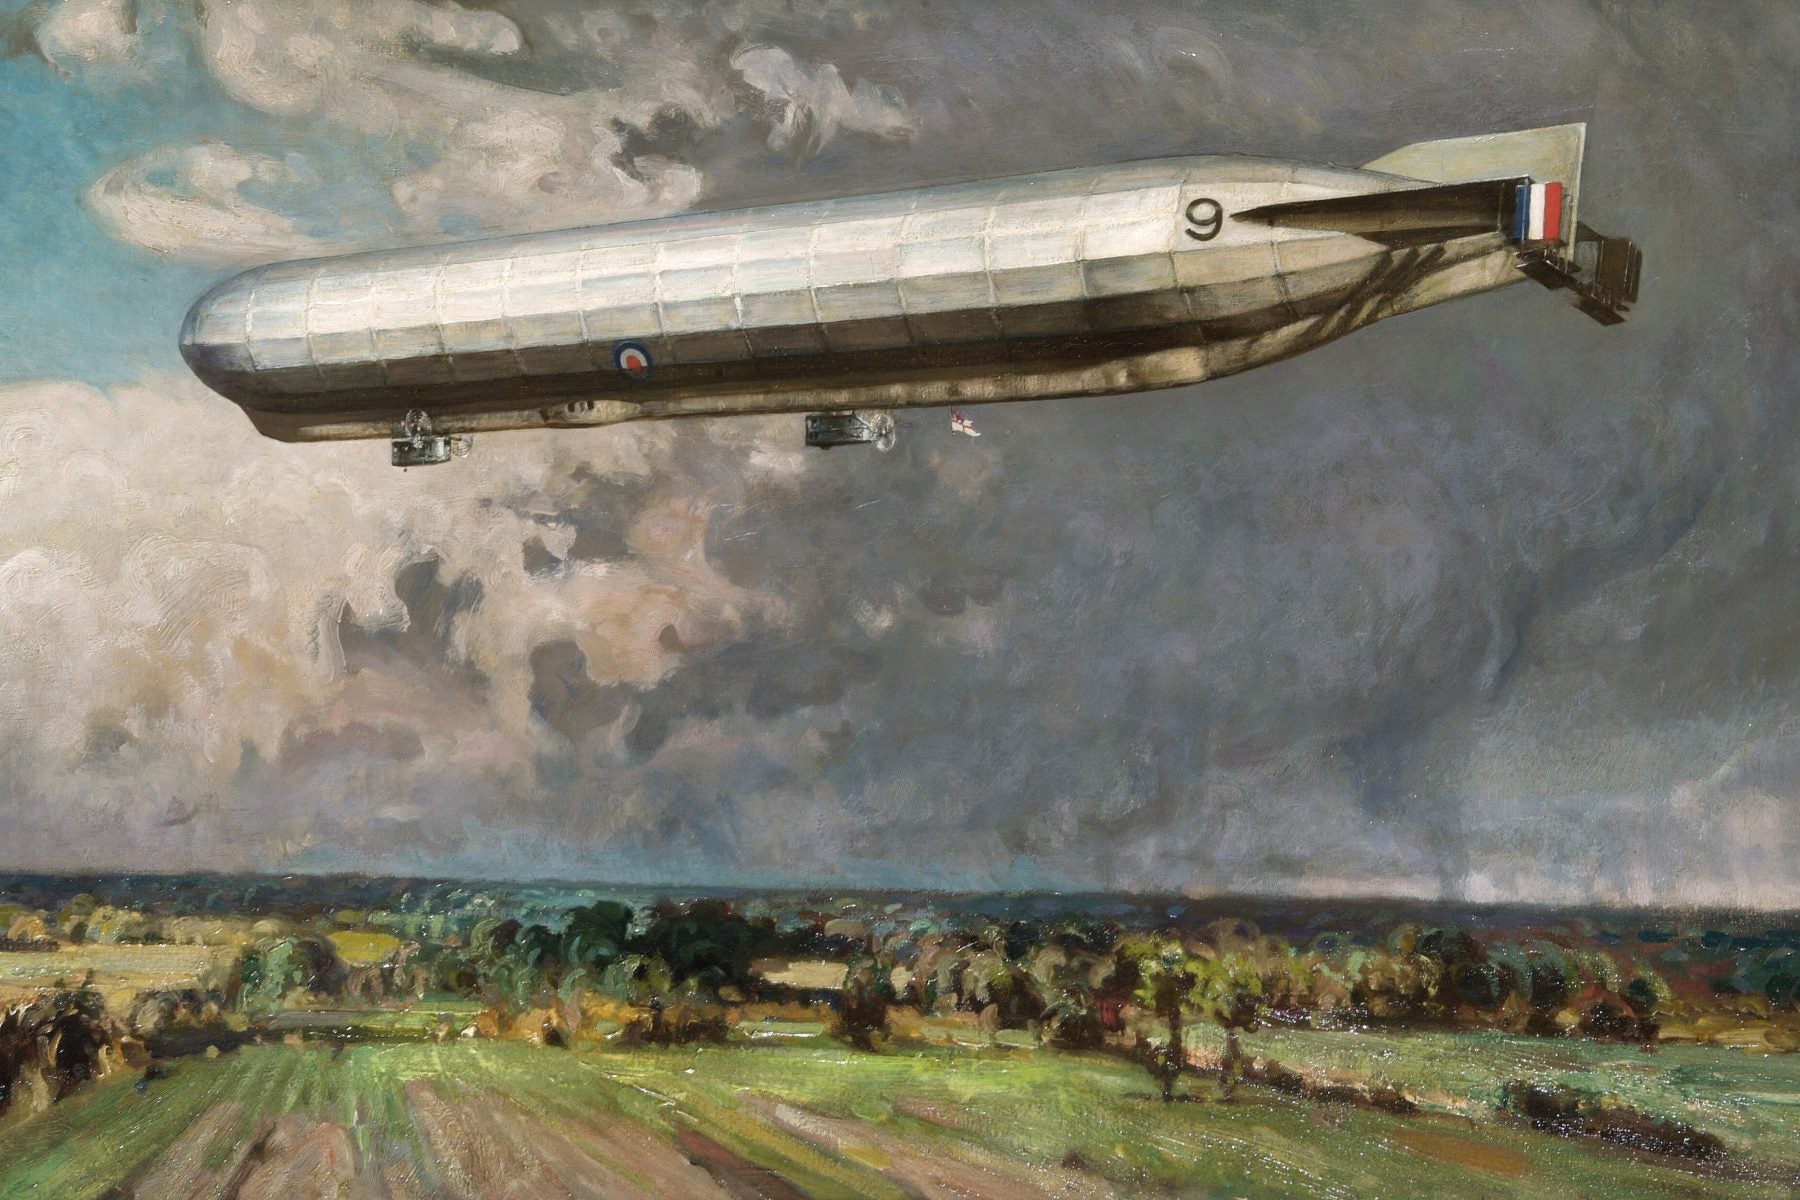 A British airship in flight above the British countryside set against a cloudy sky, 1918